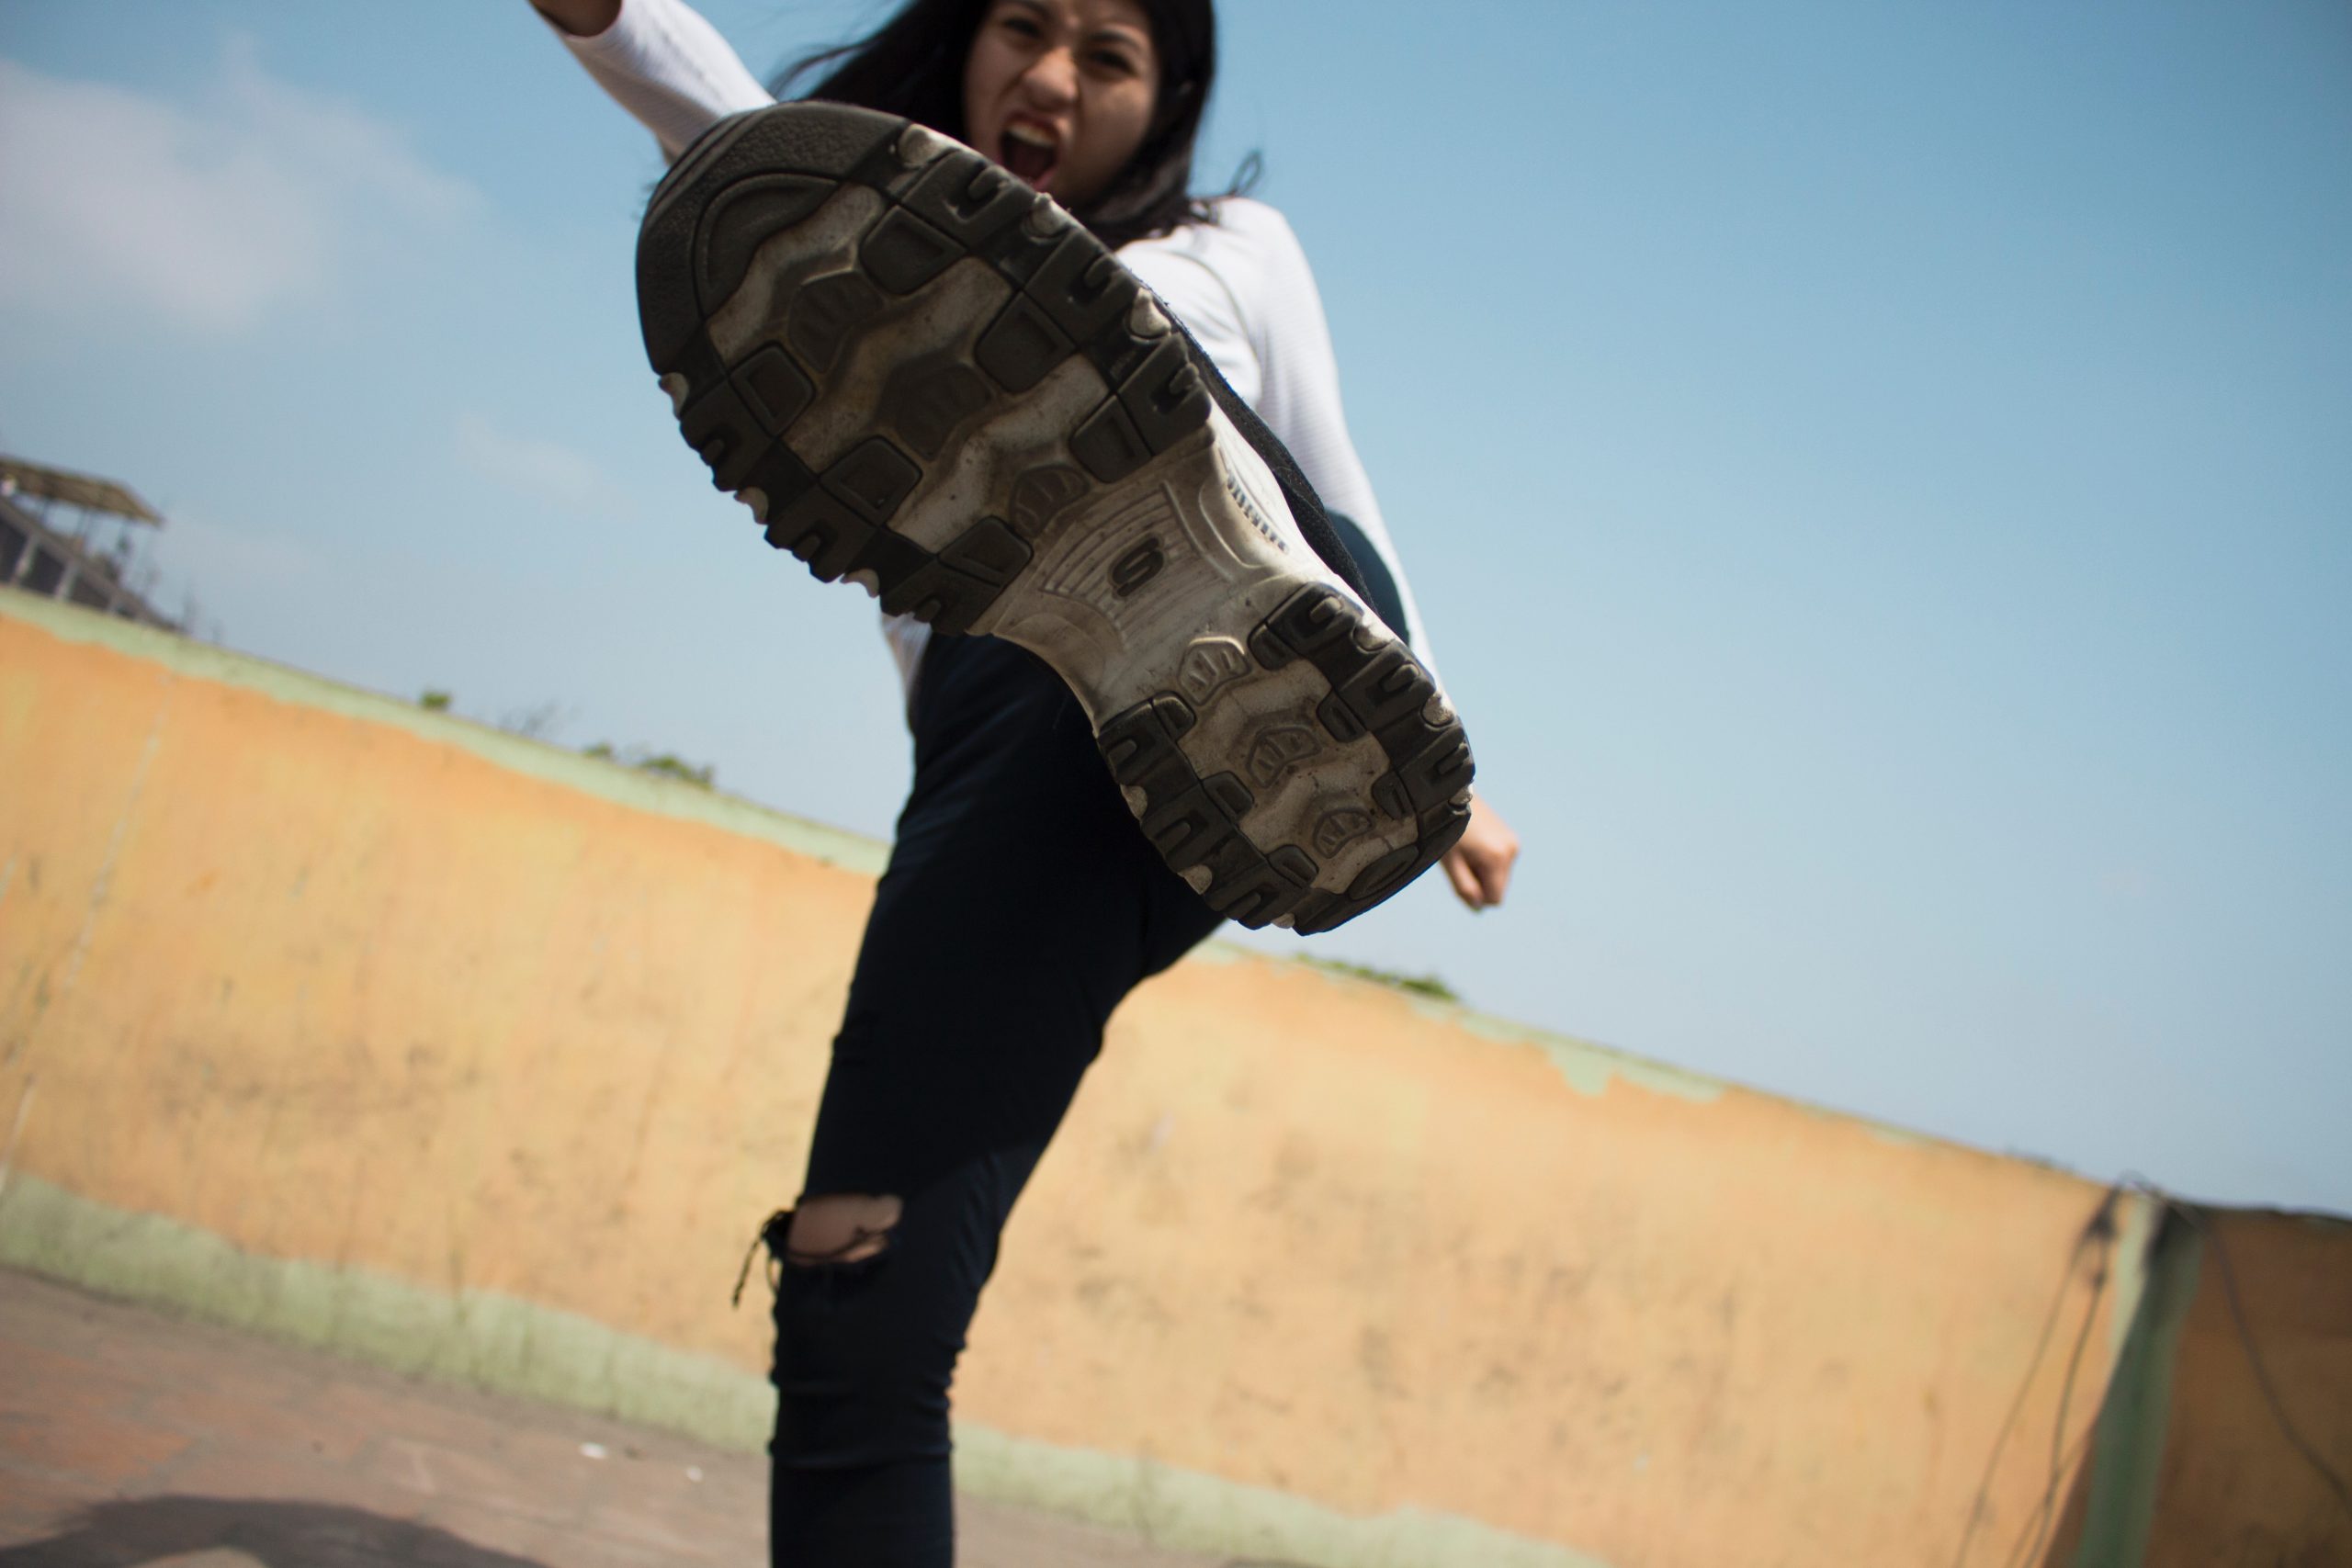 A woman kicking out with the underside of her sneaker in the forefront of the image.